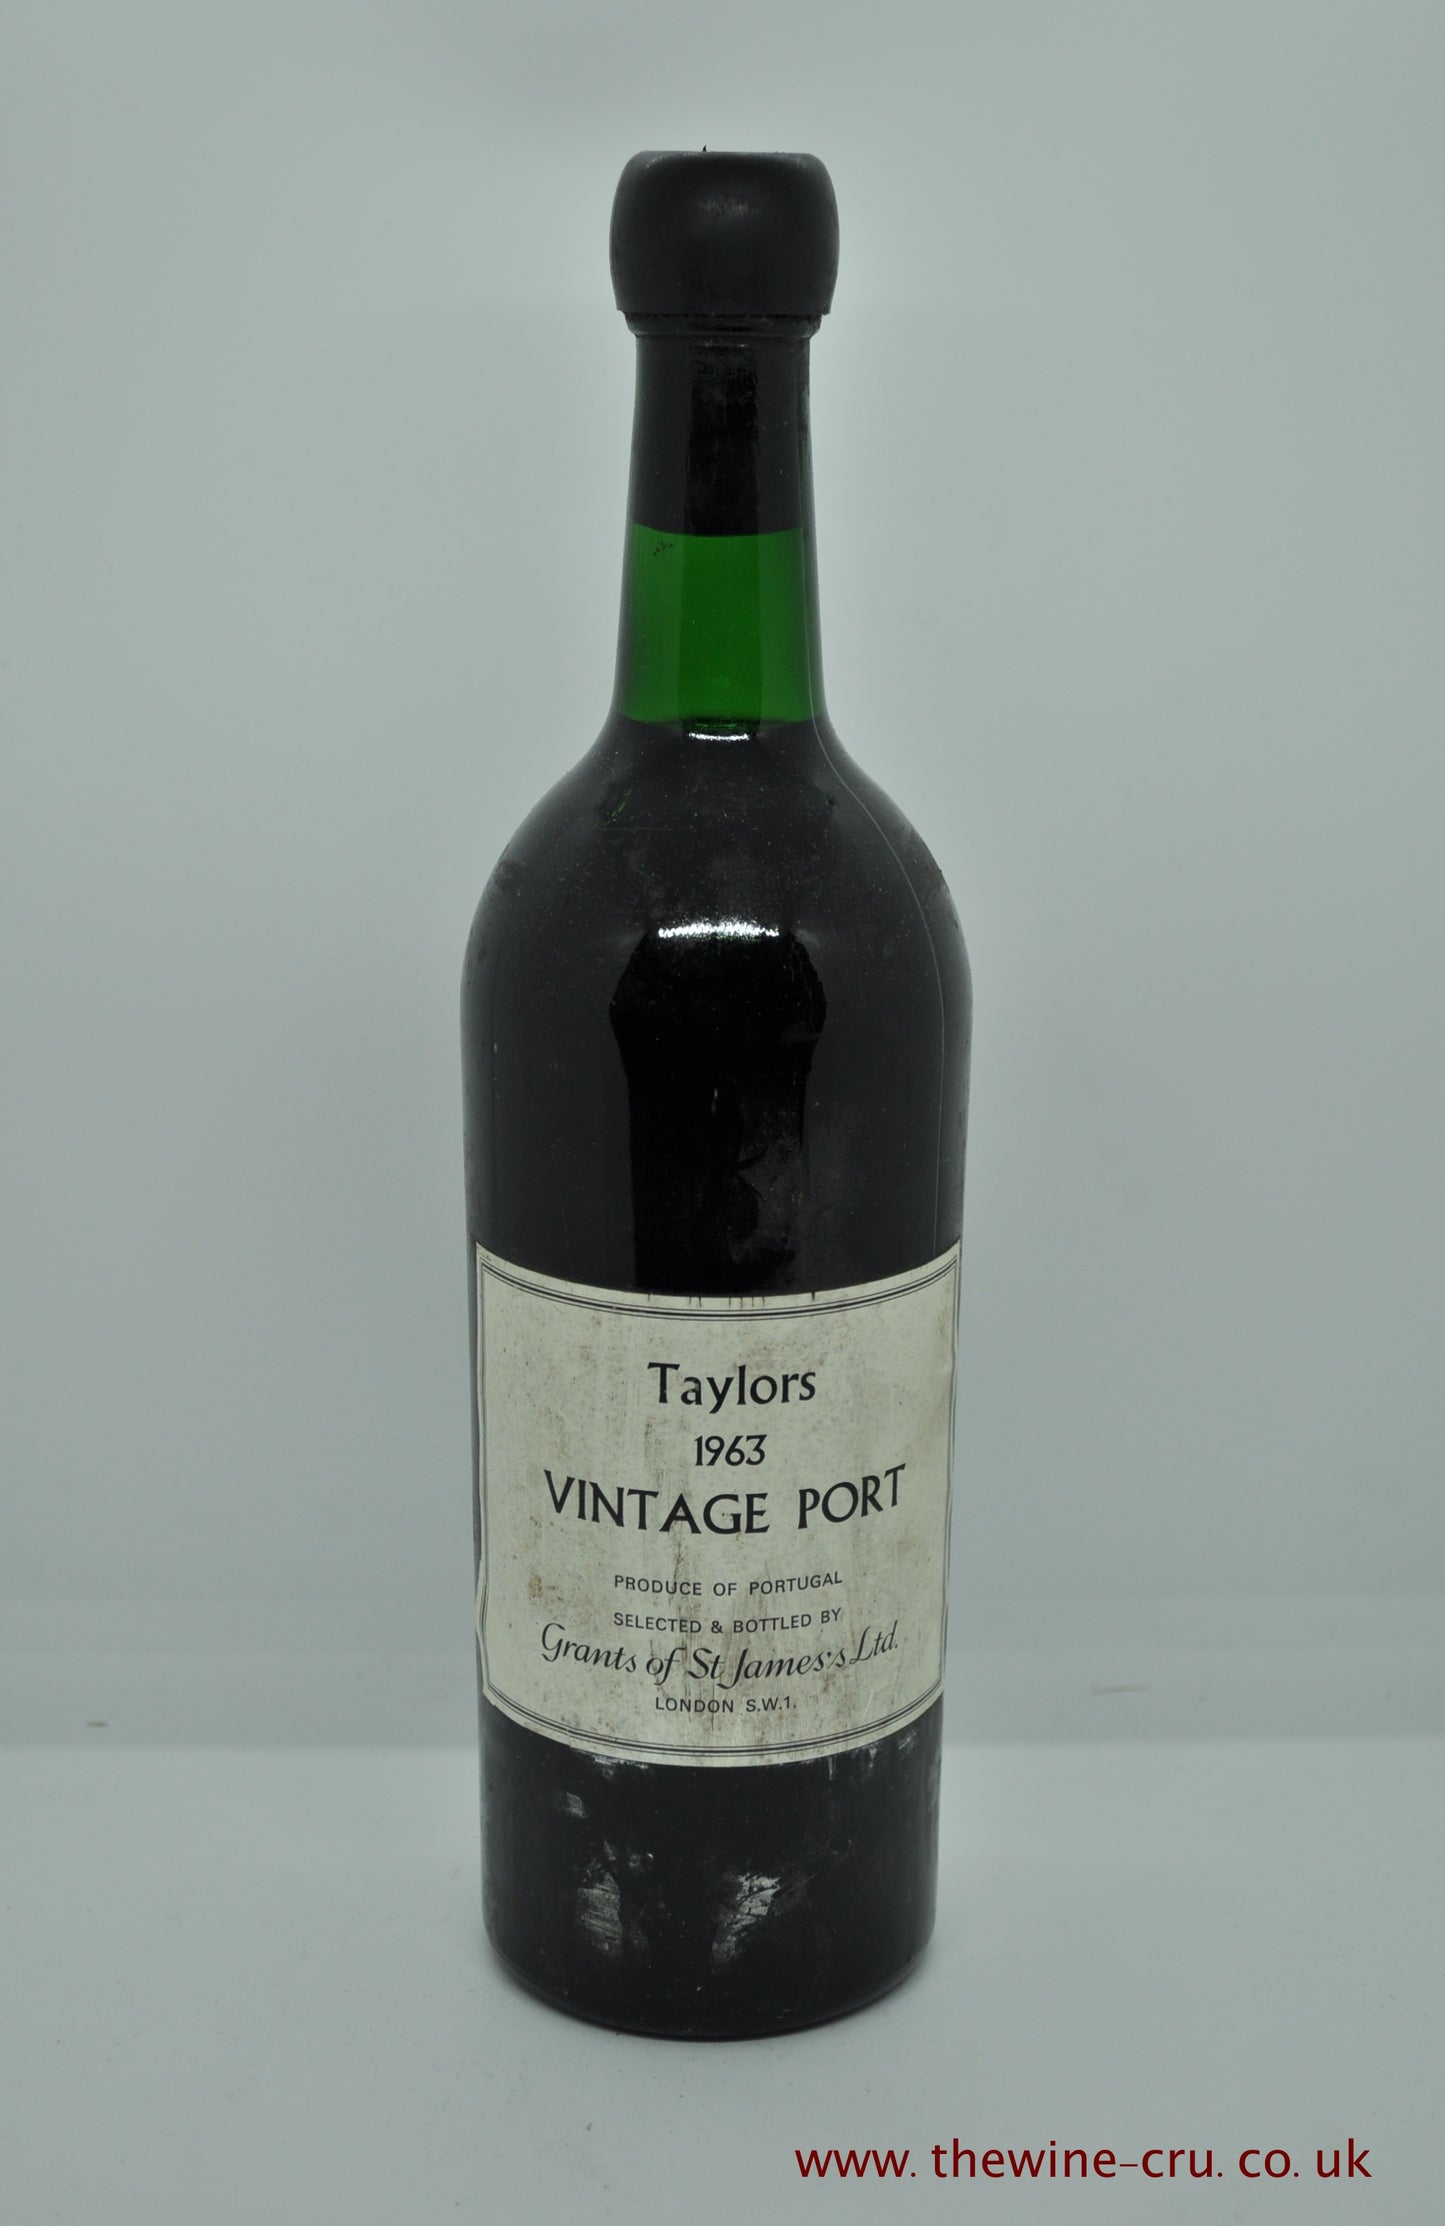 1963 vintage port wine. Taylors Vintage Port. Portugal. The bottle is in good condition with the wine level being base of neck. Immediate delivery. Free local delivery. Gift wrapping available.